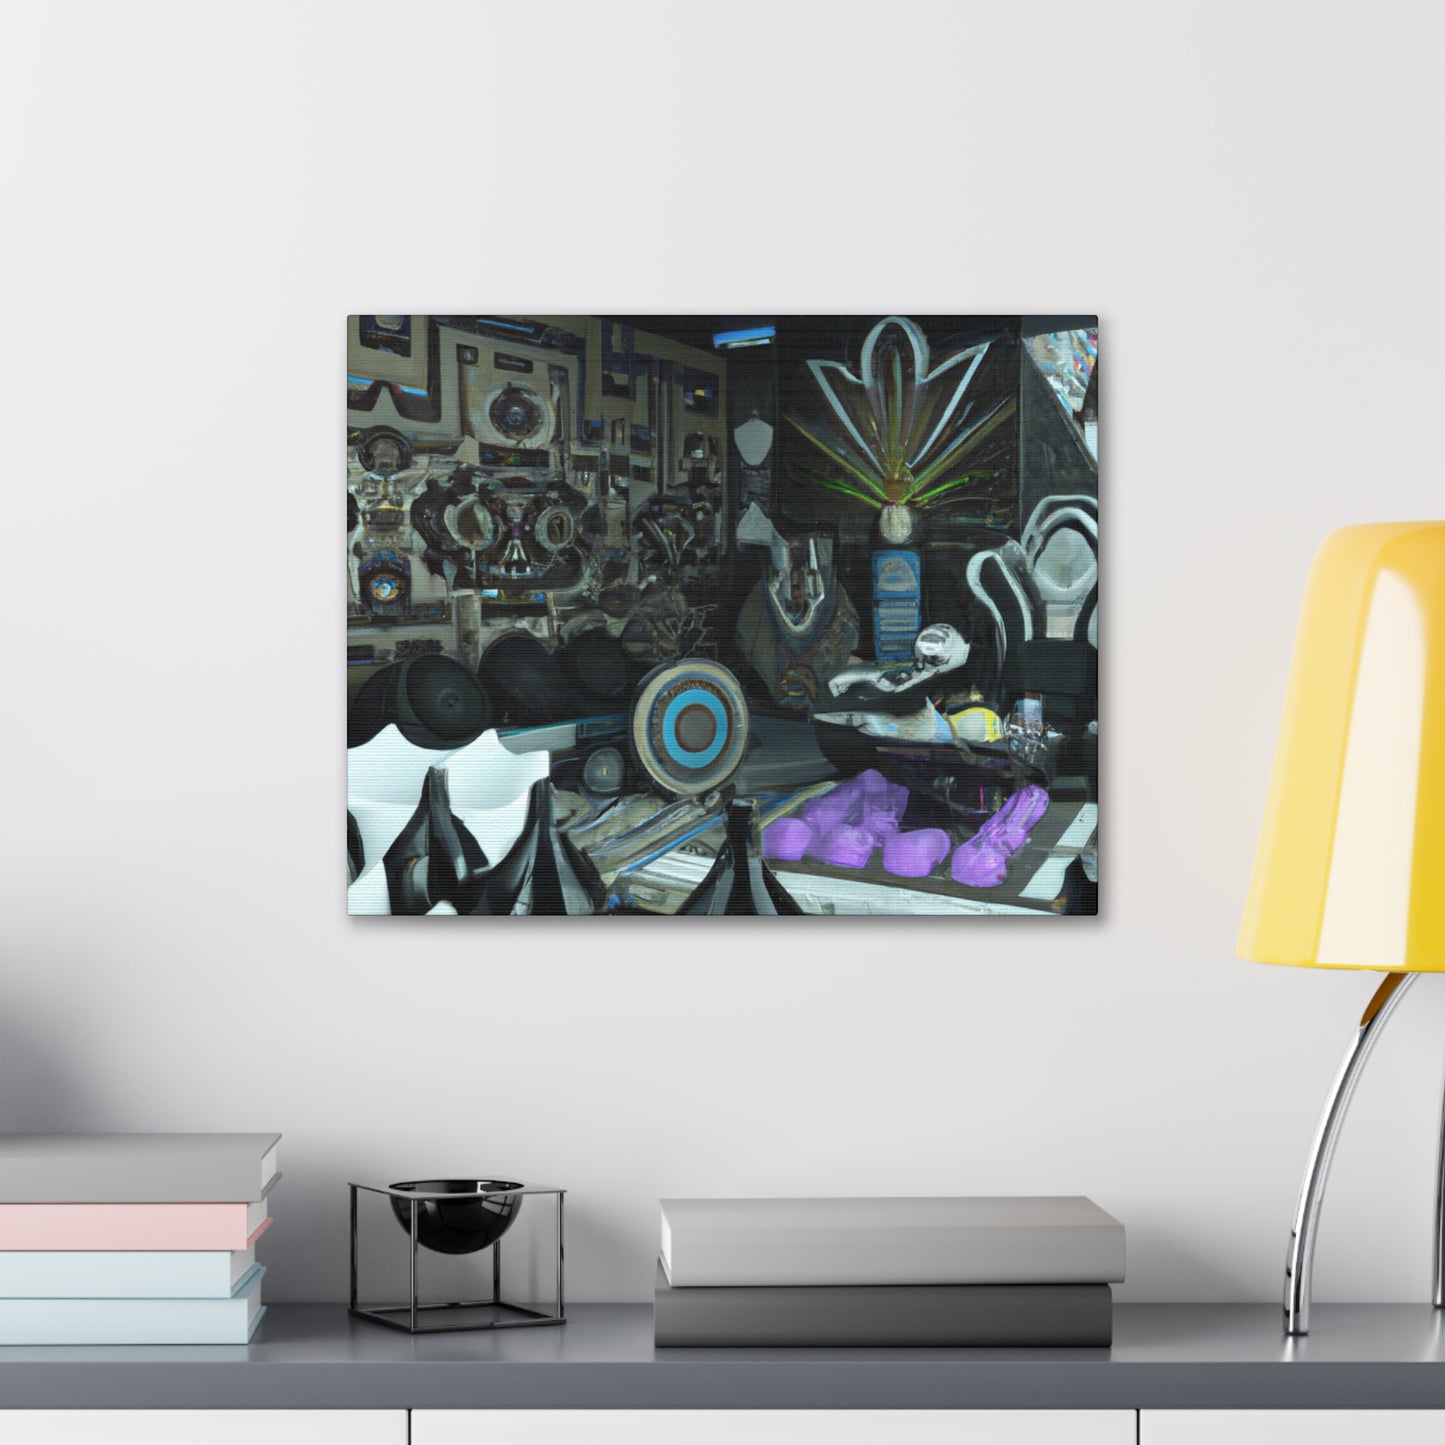 furniture?

Elegance Collection - Canvas